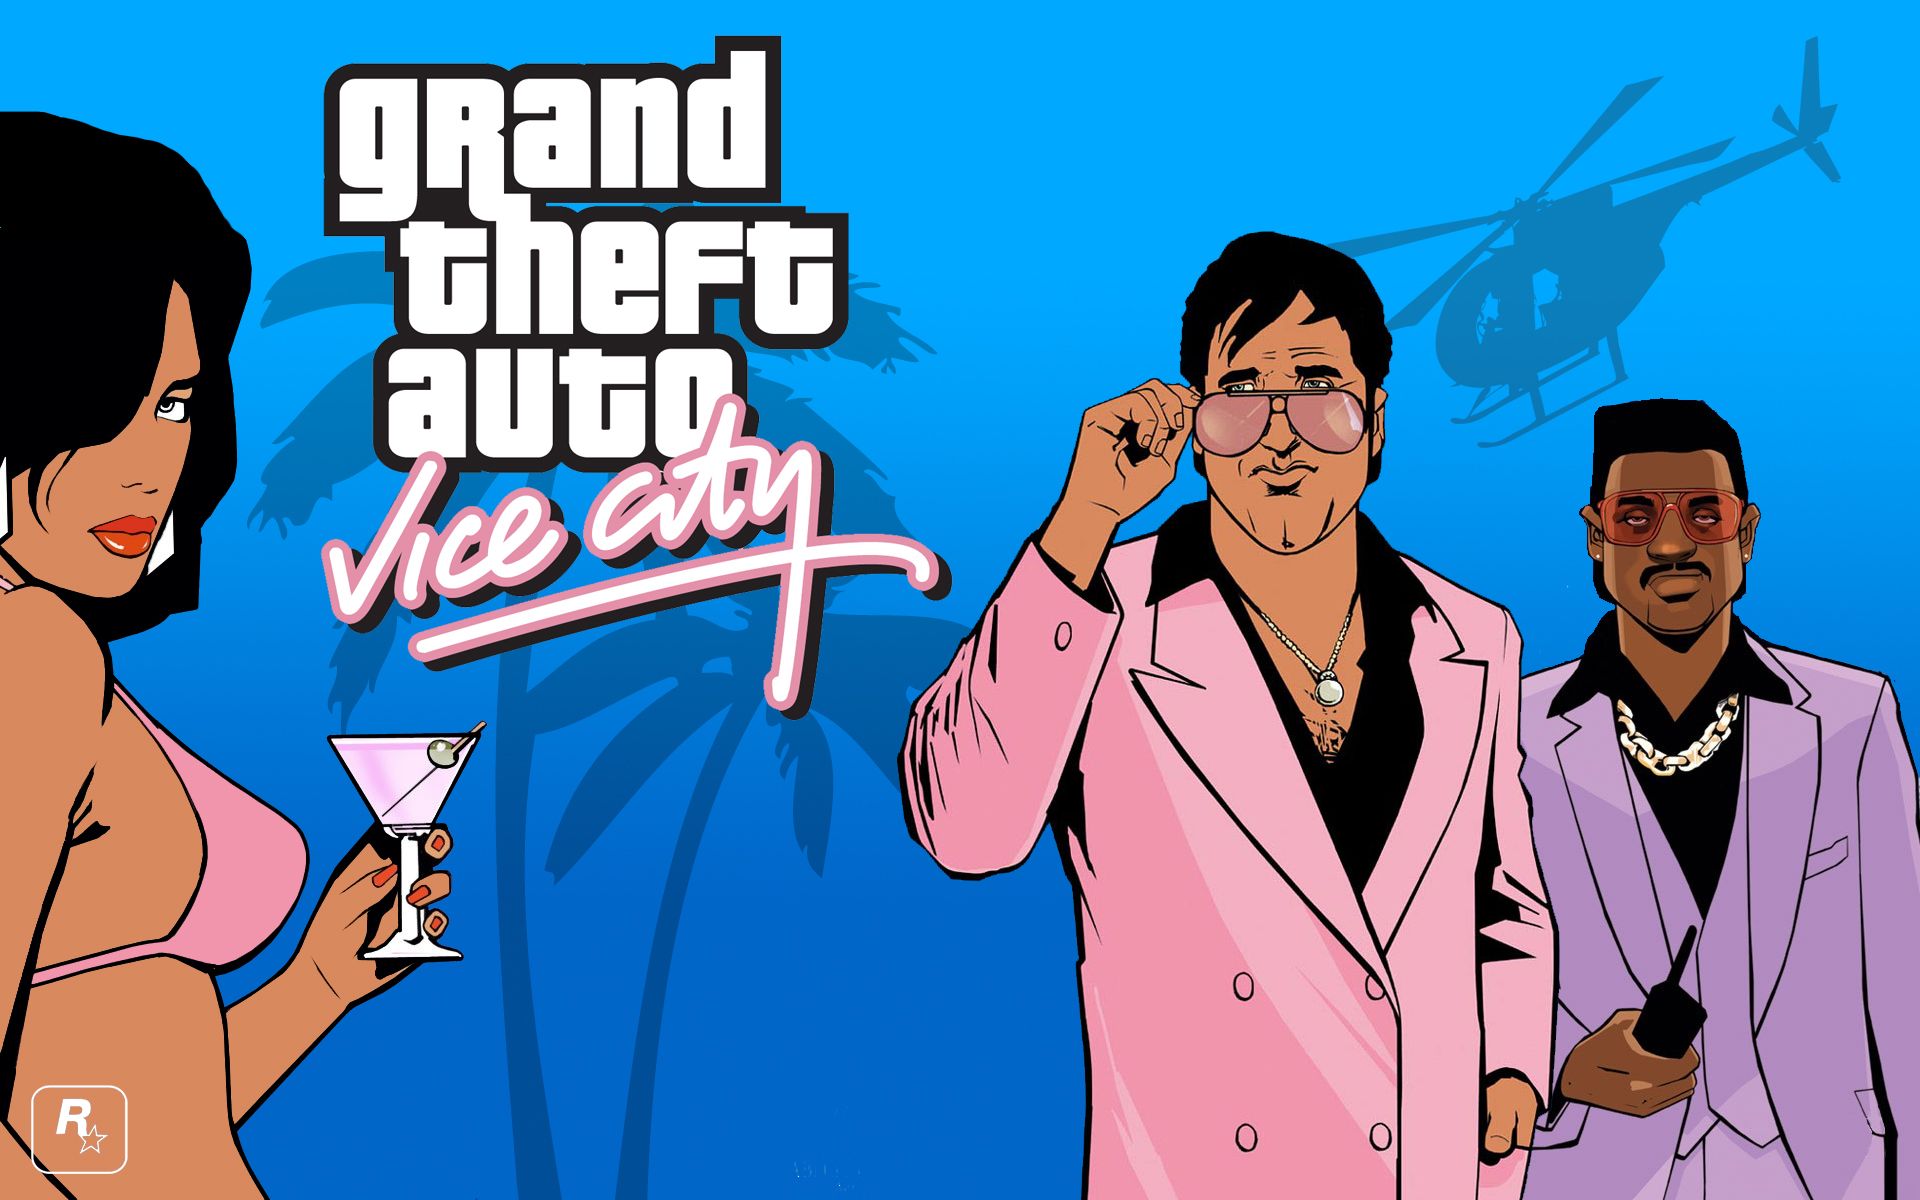 Grand-Theft-Auto-Vice-City-Wallpapers-Download.jpg